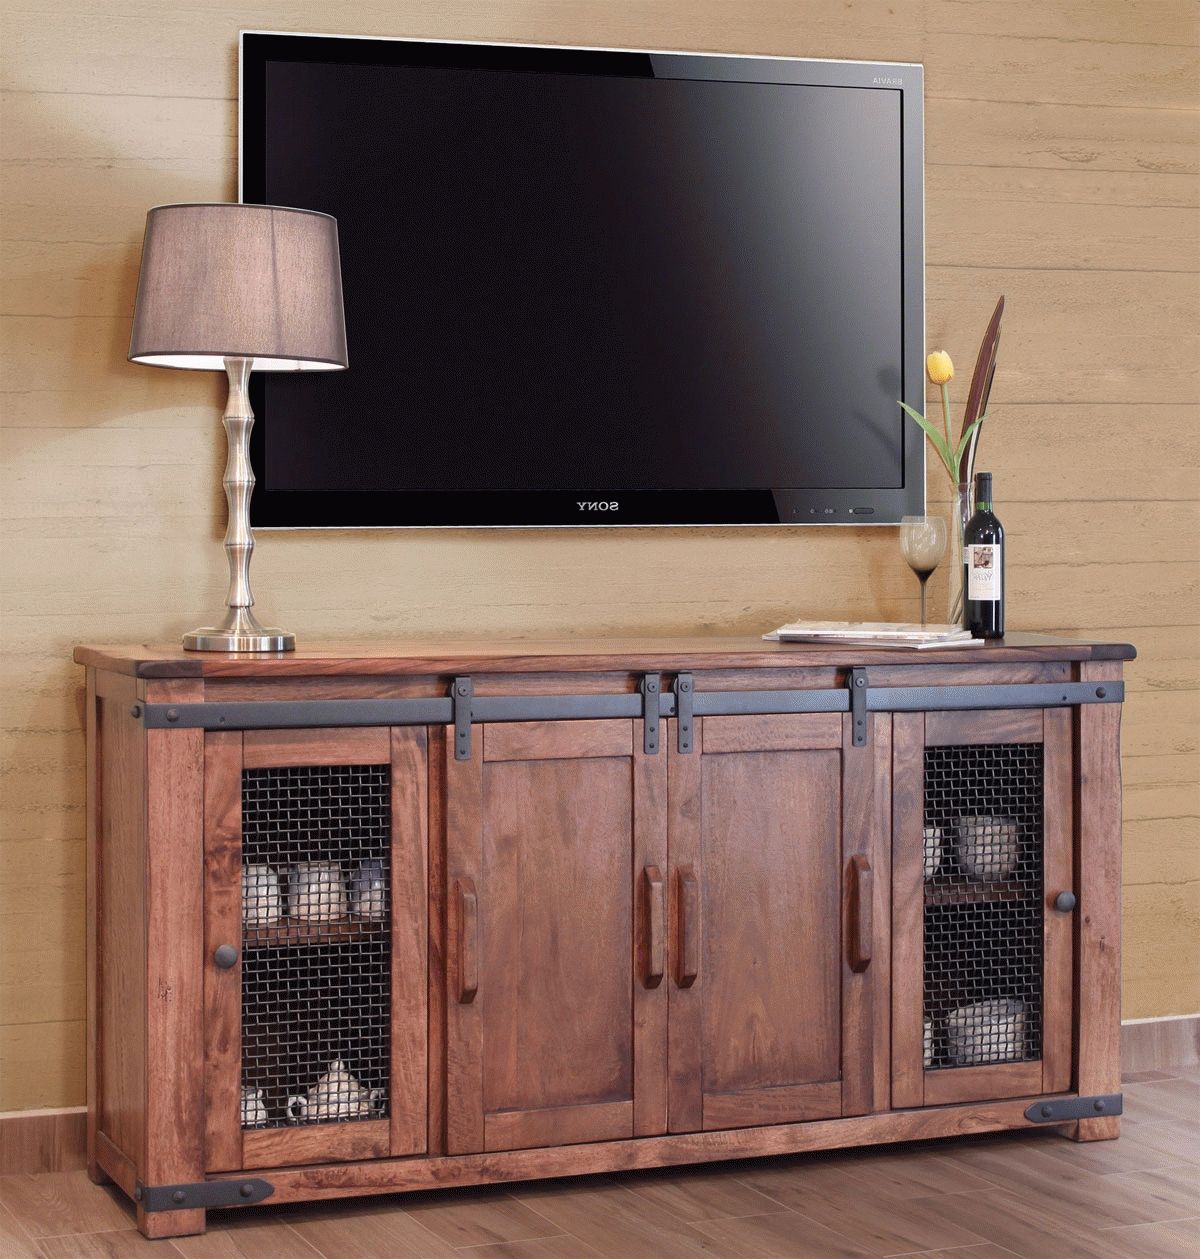 Rustic Tv Stand, Wood Tv Stand, Pine Tv Stand Within White Rustic Tv Stands (View 9 of 15)